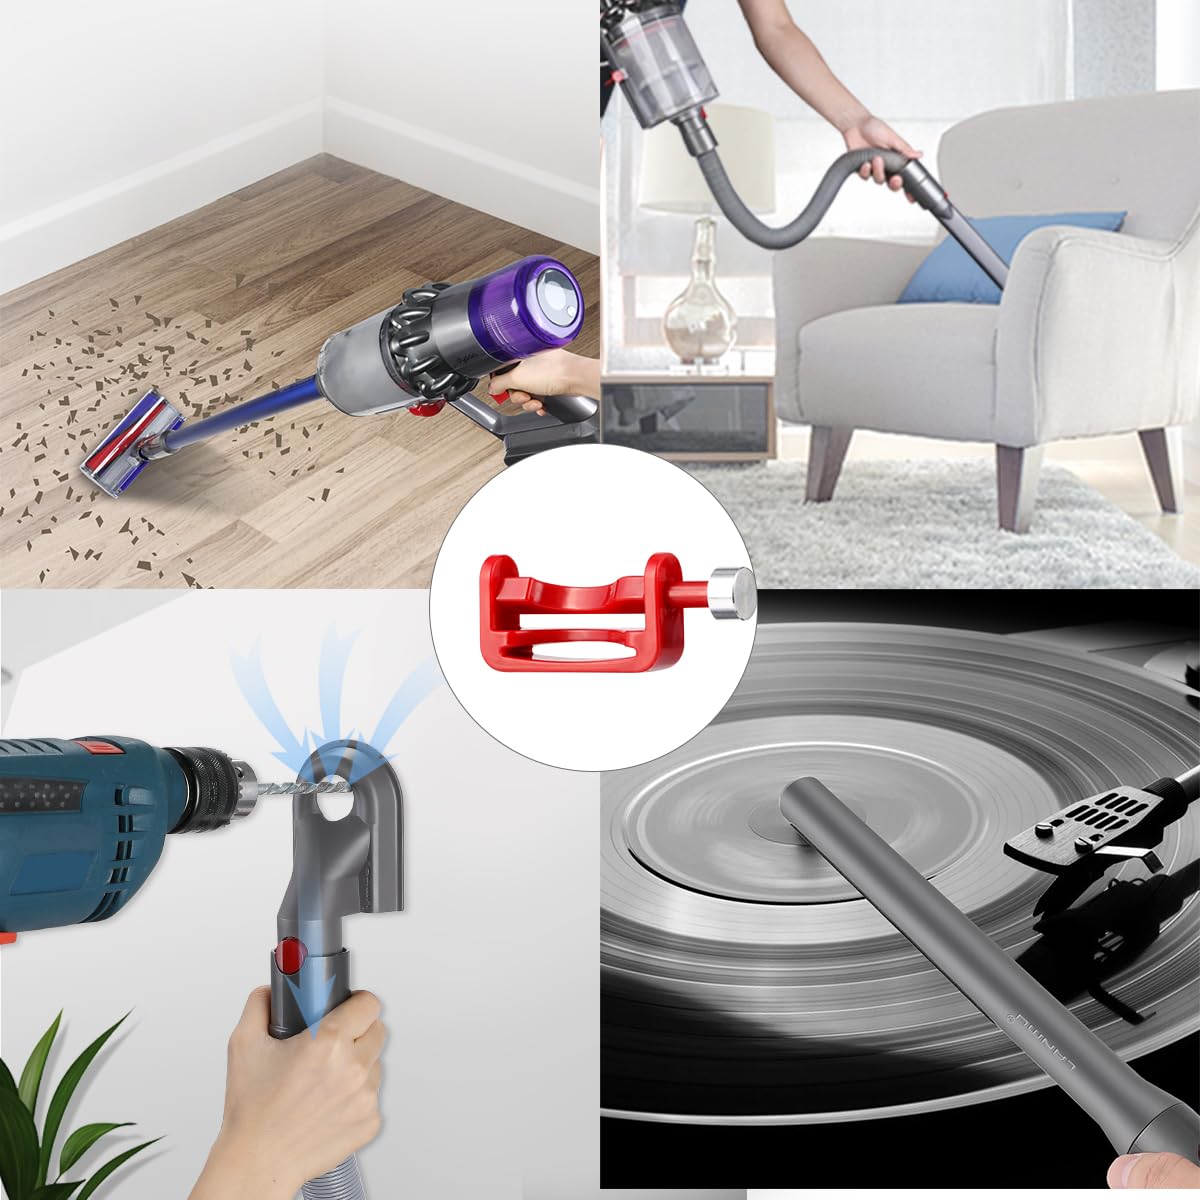 The power button switch lock can be used to hold the vacuum cleaner's trigger.